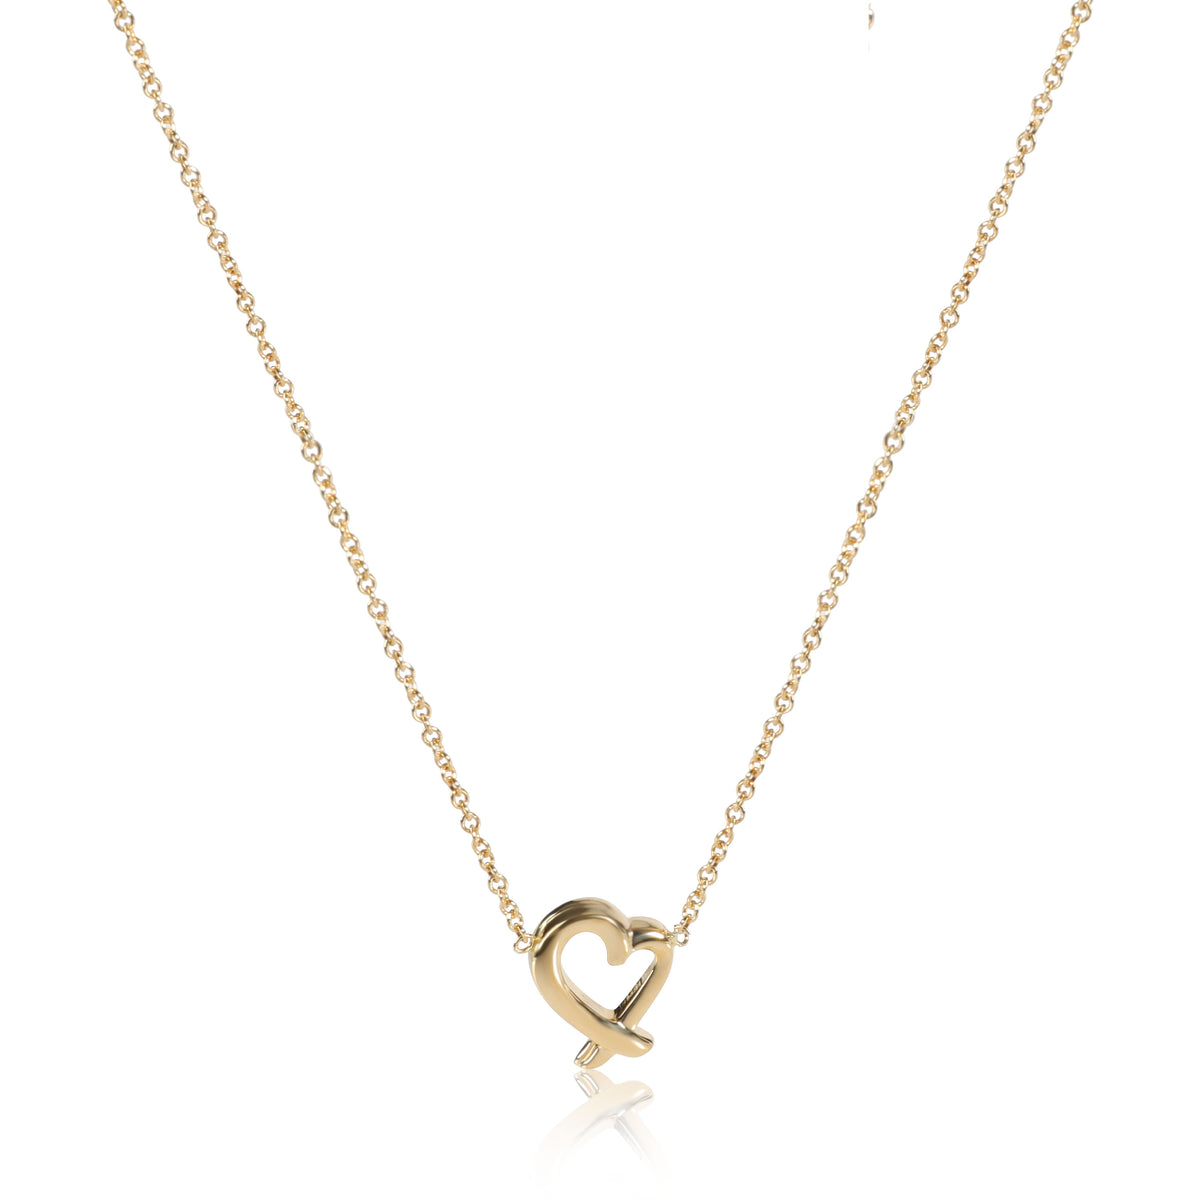 Tiffany & Co. Paloma Picasso Heart Necklace in 18K Yellow Gold